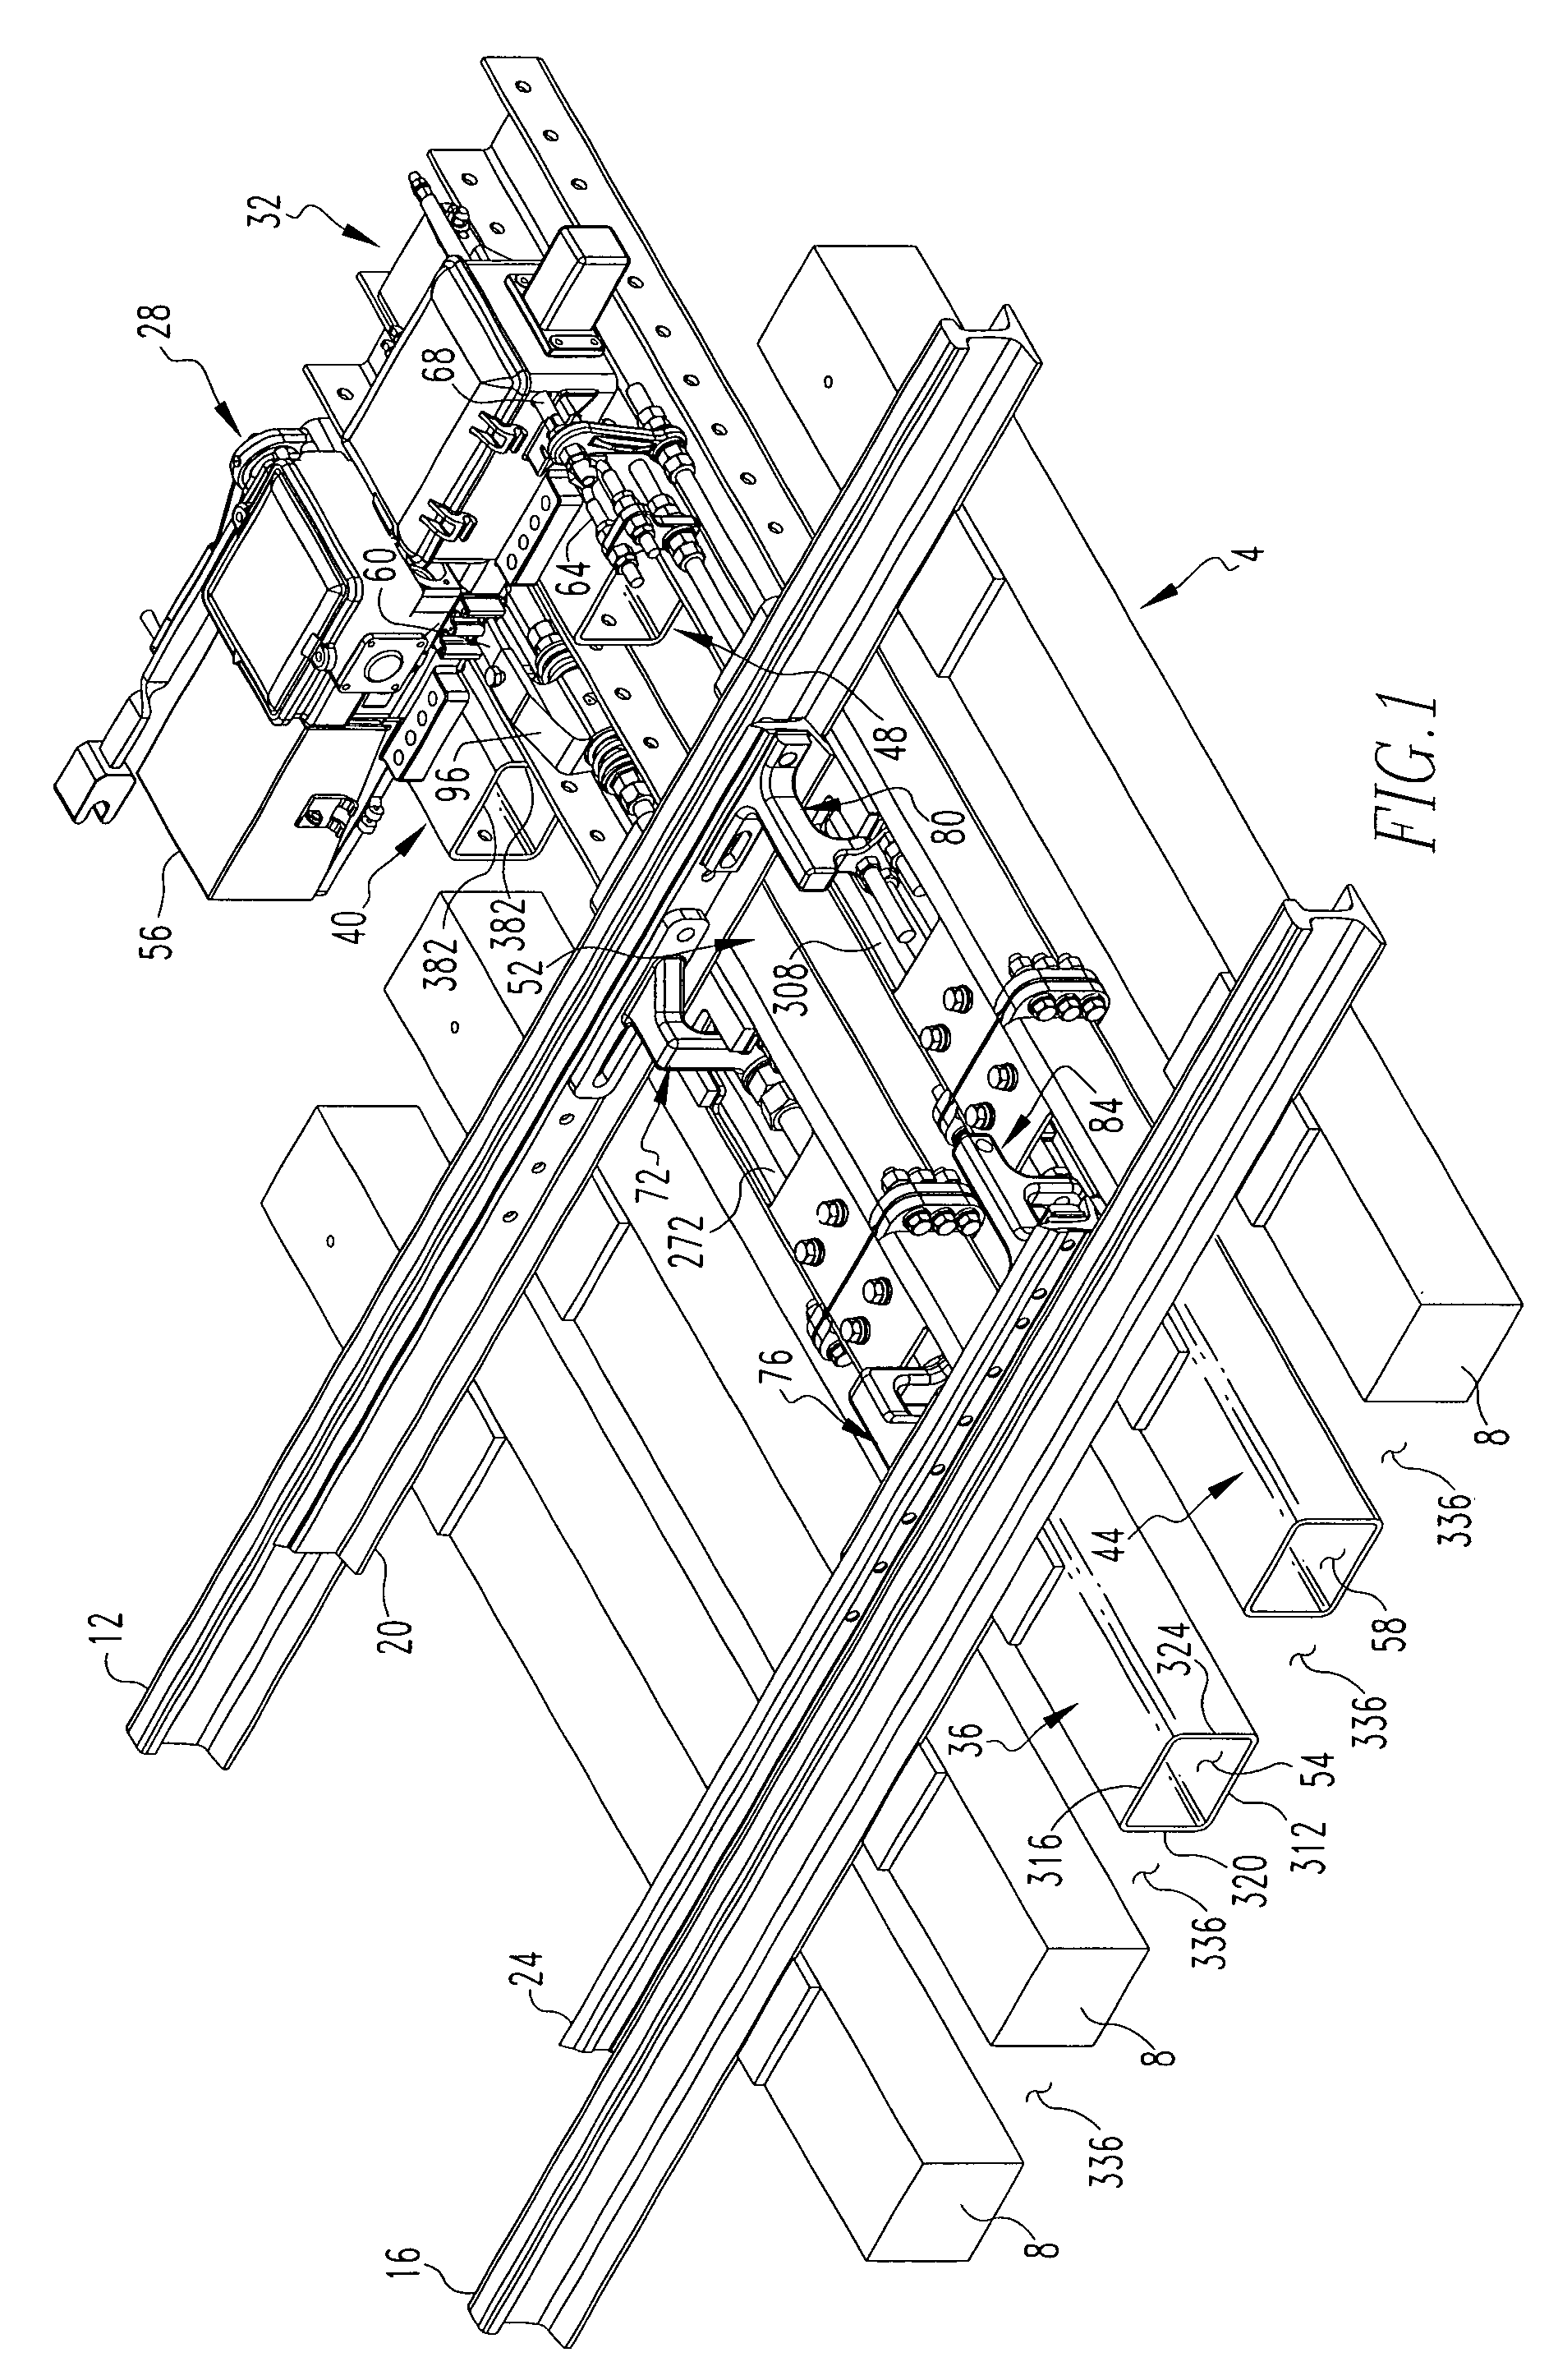 Hollow tie railroad switching assembly